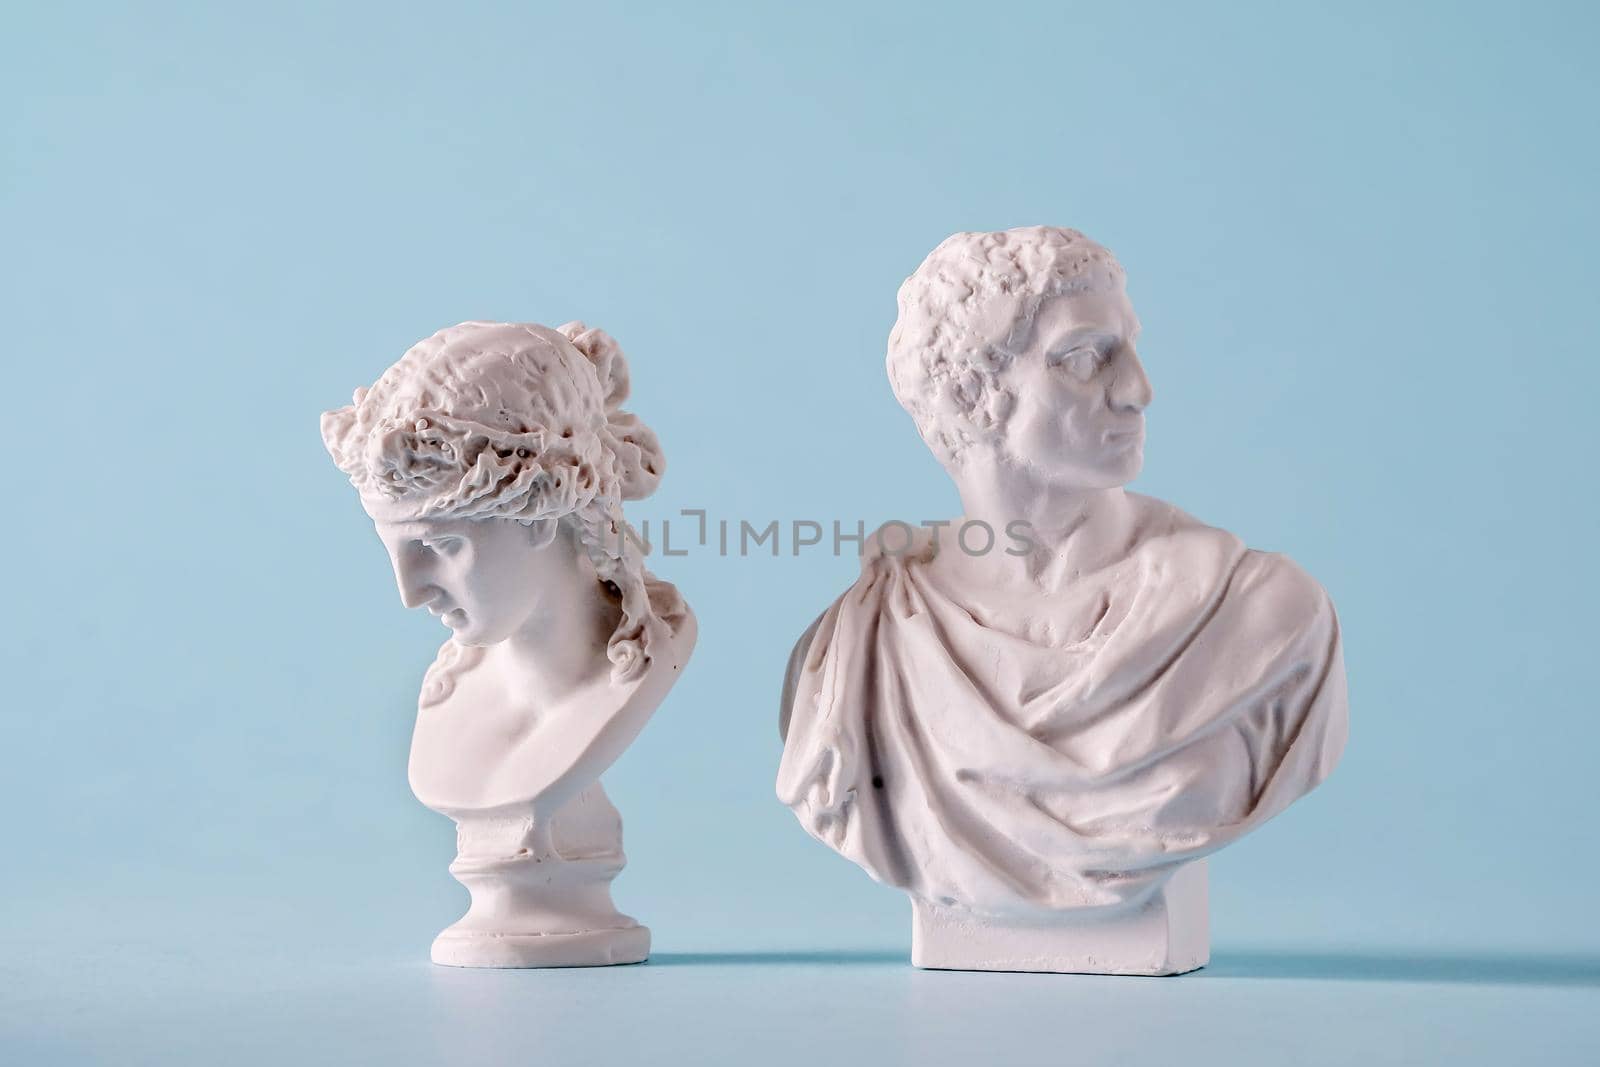 Two white Roman or antique style Grecian busts by sergii_gnatiuk